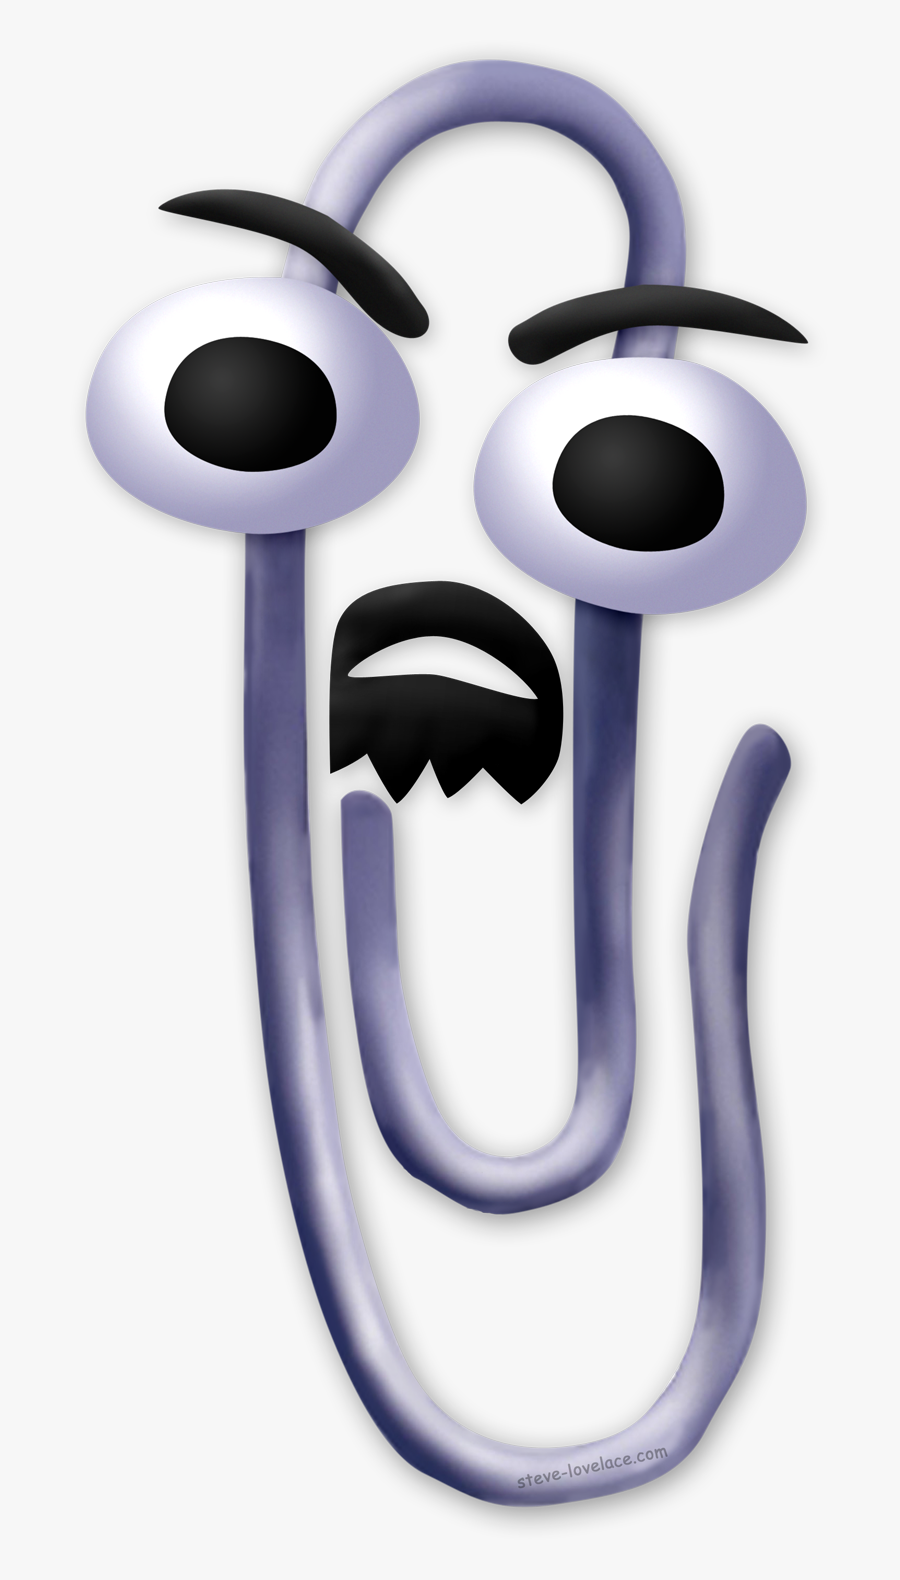 Apple Clipart Microsoft Corp - Clippy Png, Transparent Clipart